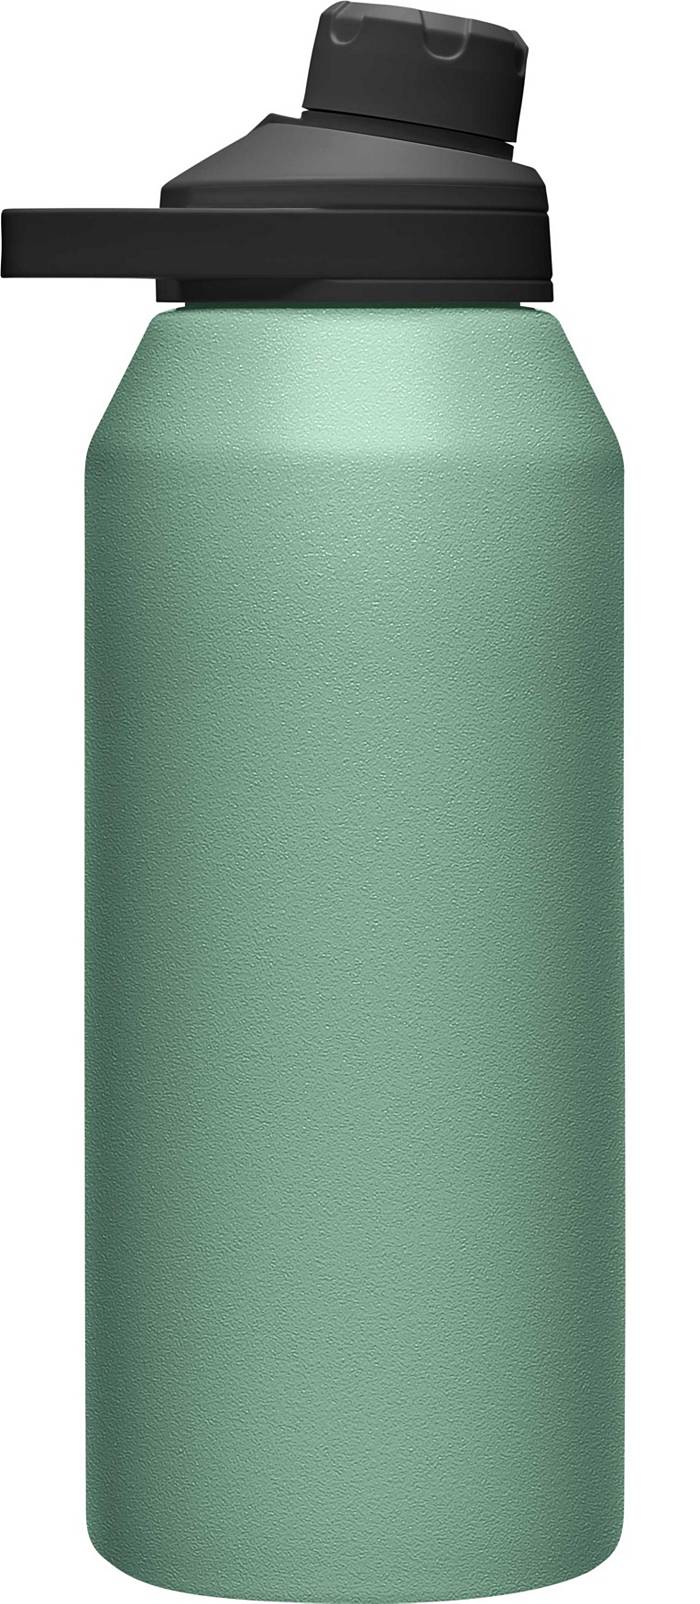 Camelbak 40 Oz Chute Mag Vacuum Insulated Stainless Water Bottle, Insulated Bottles